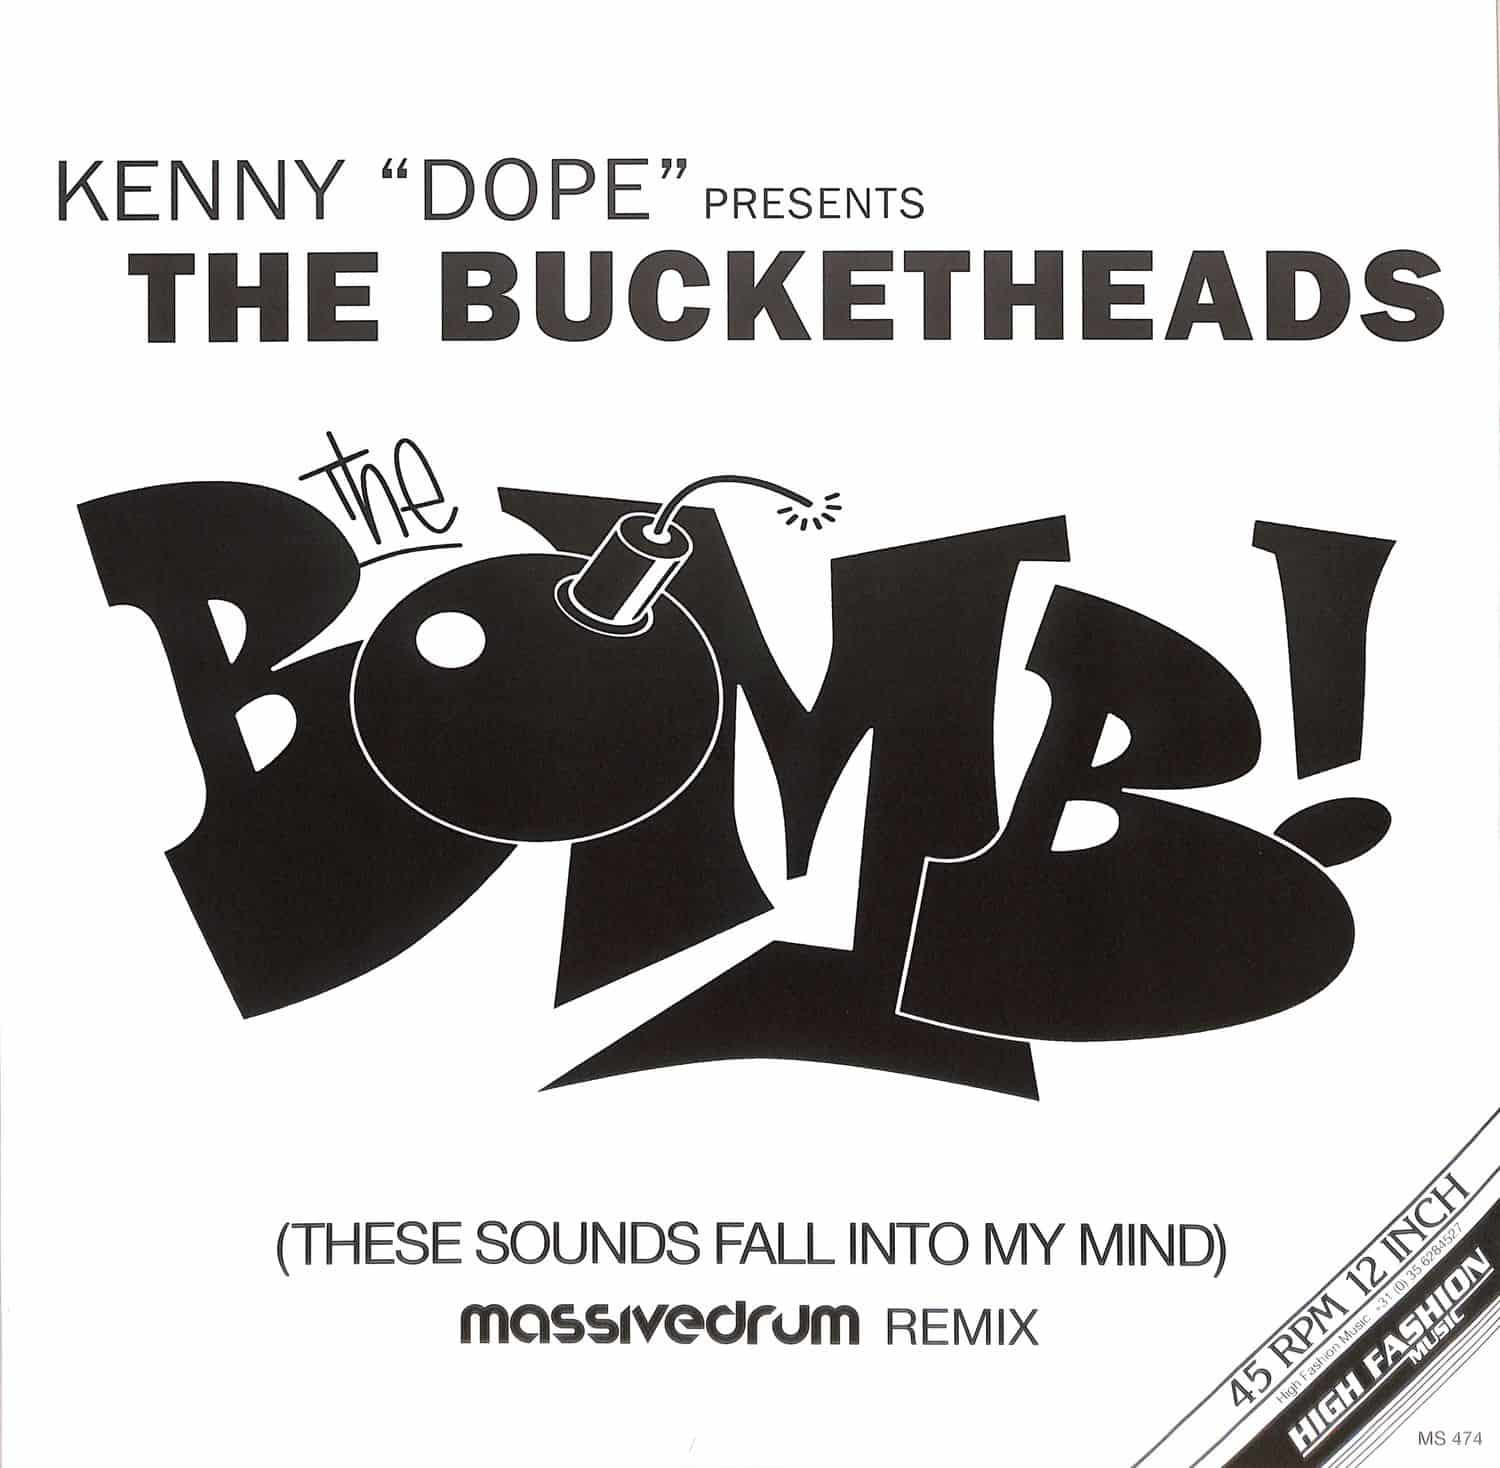 The Bucketheads - THE BOMB! 